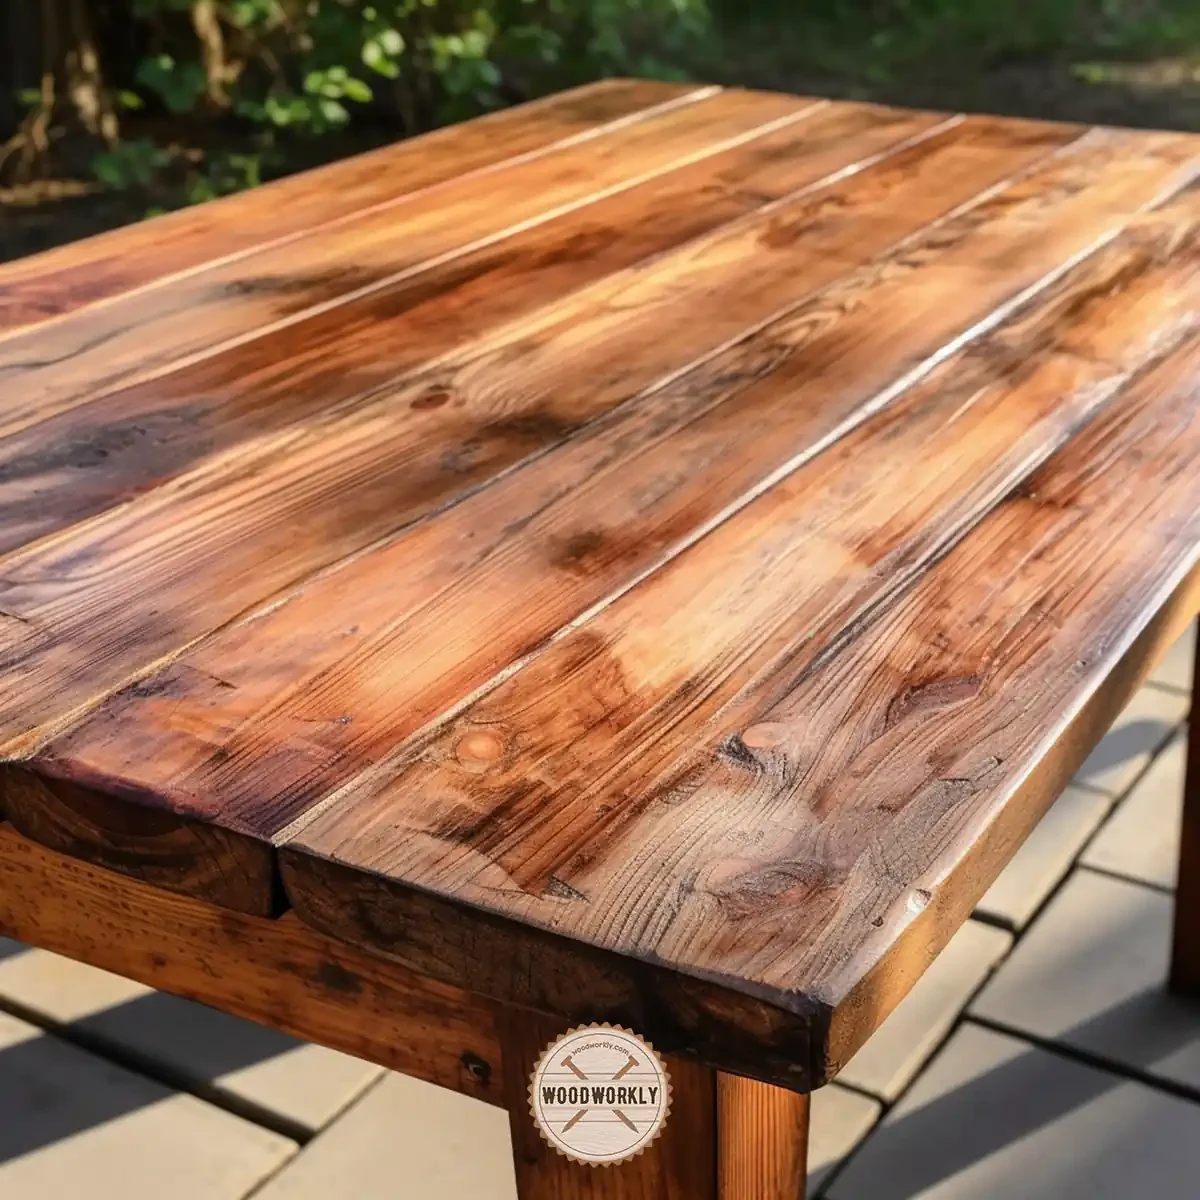 stained wood table that is not dark enough